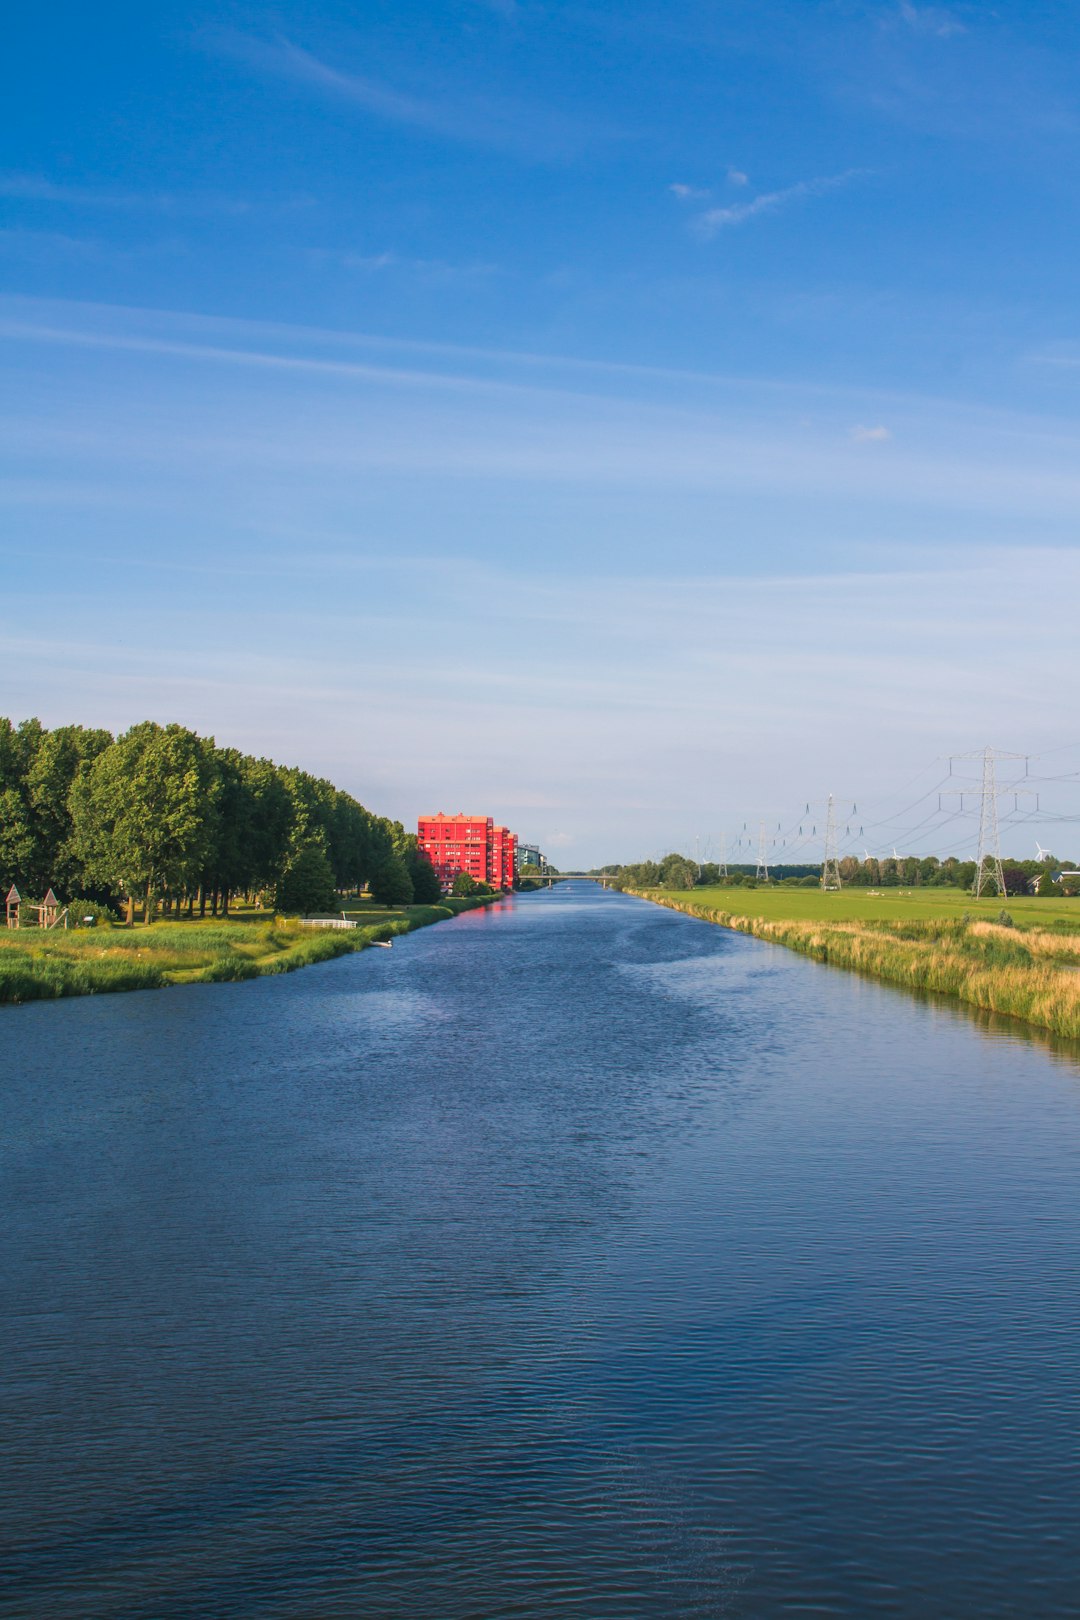 Travel Tips and Stories of Almere in Netherlands